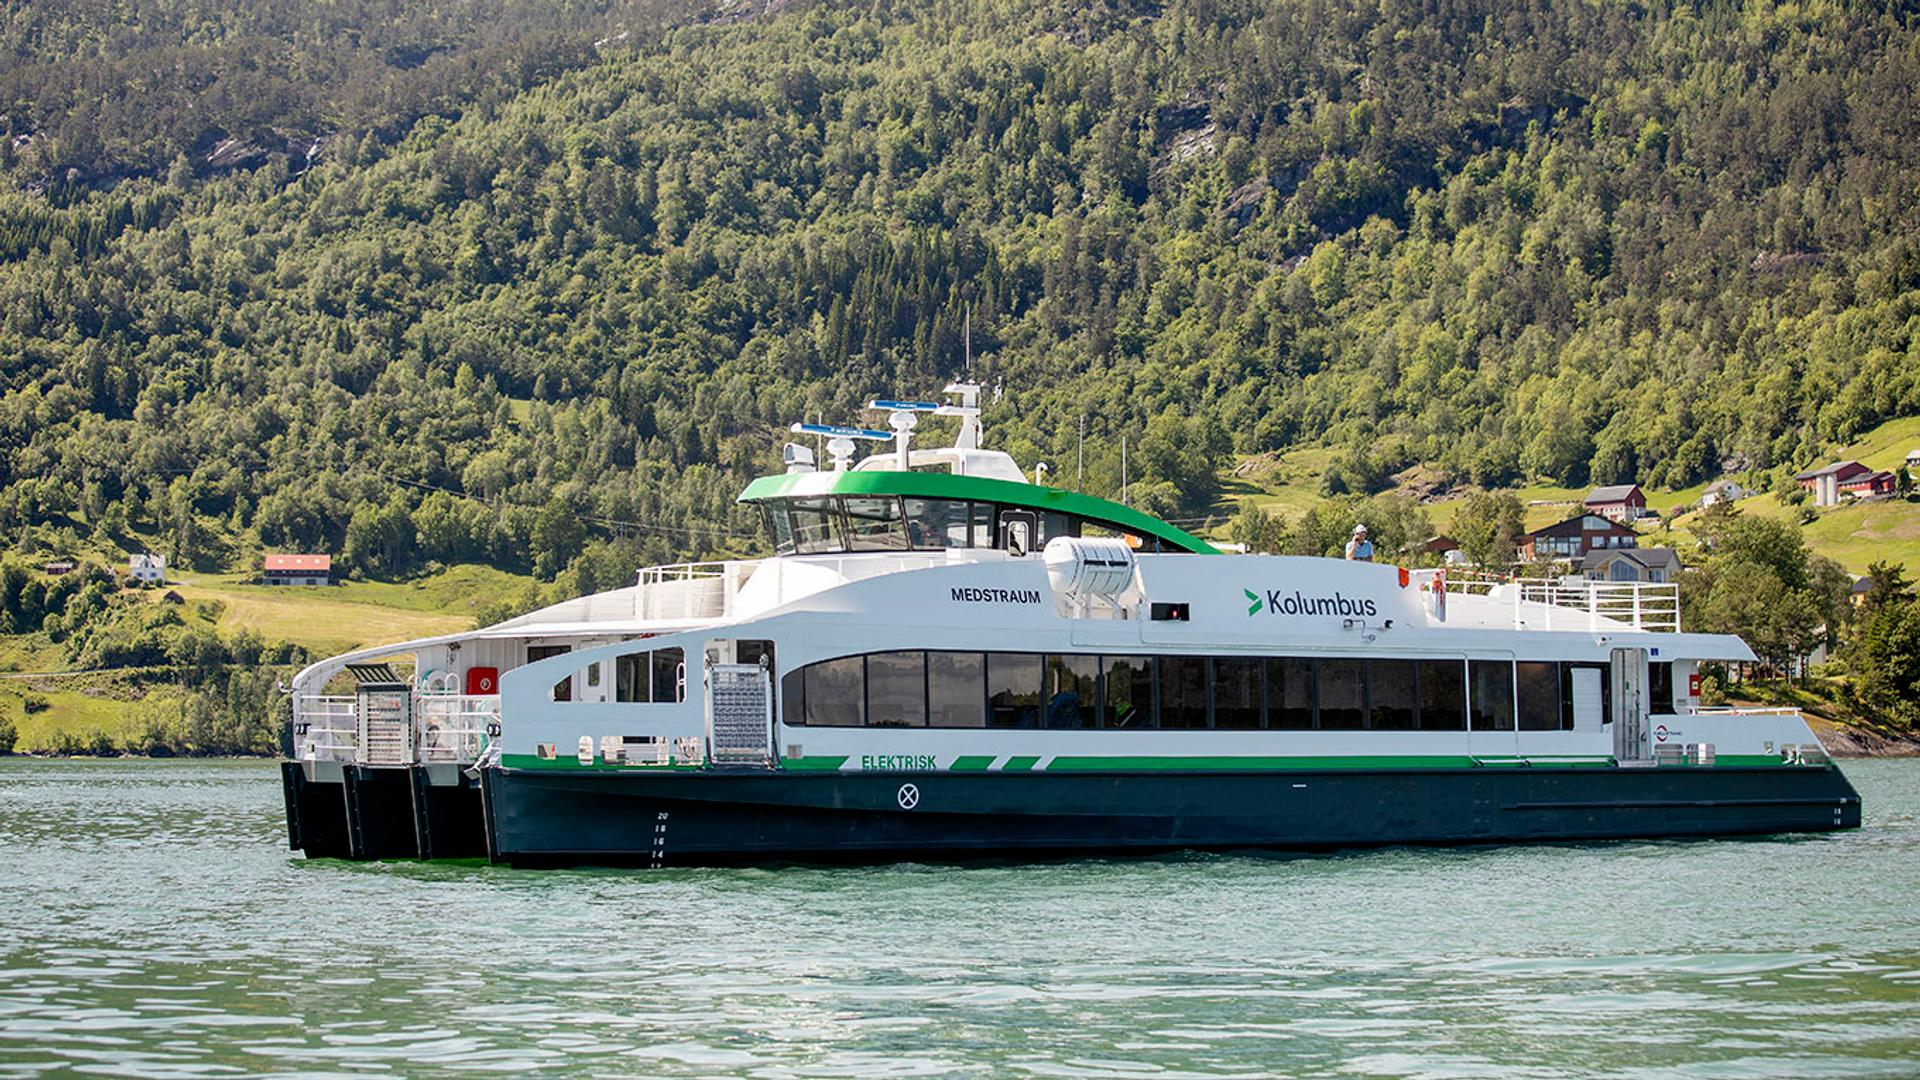 Medstraum electric fast ferry sailing in the ocean